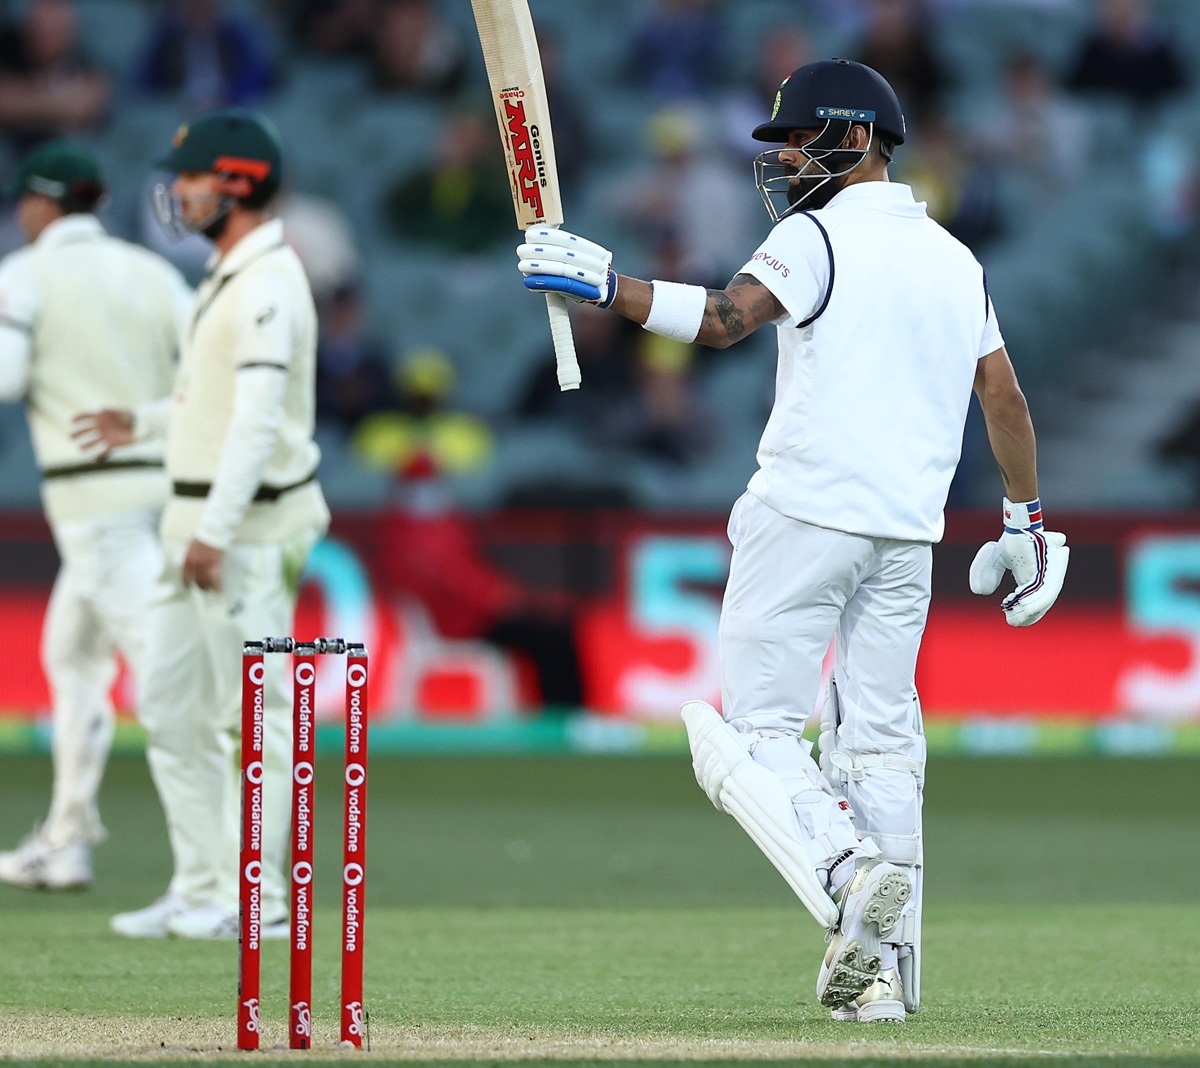 Virat Kohli batted resolutely to score a half-century on Day 1 of the first Test against Australia at Adelaide Oval on Wednesday